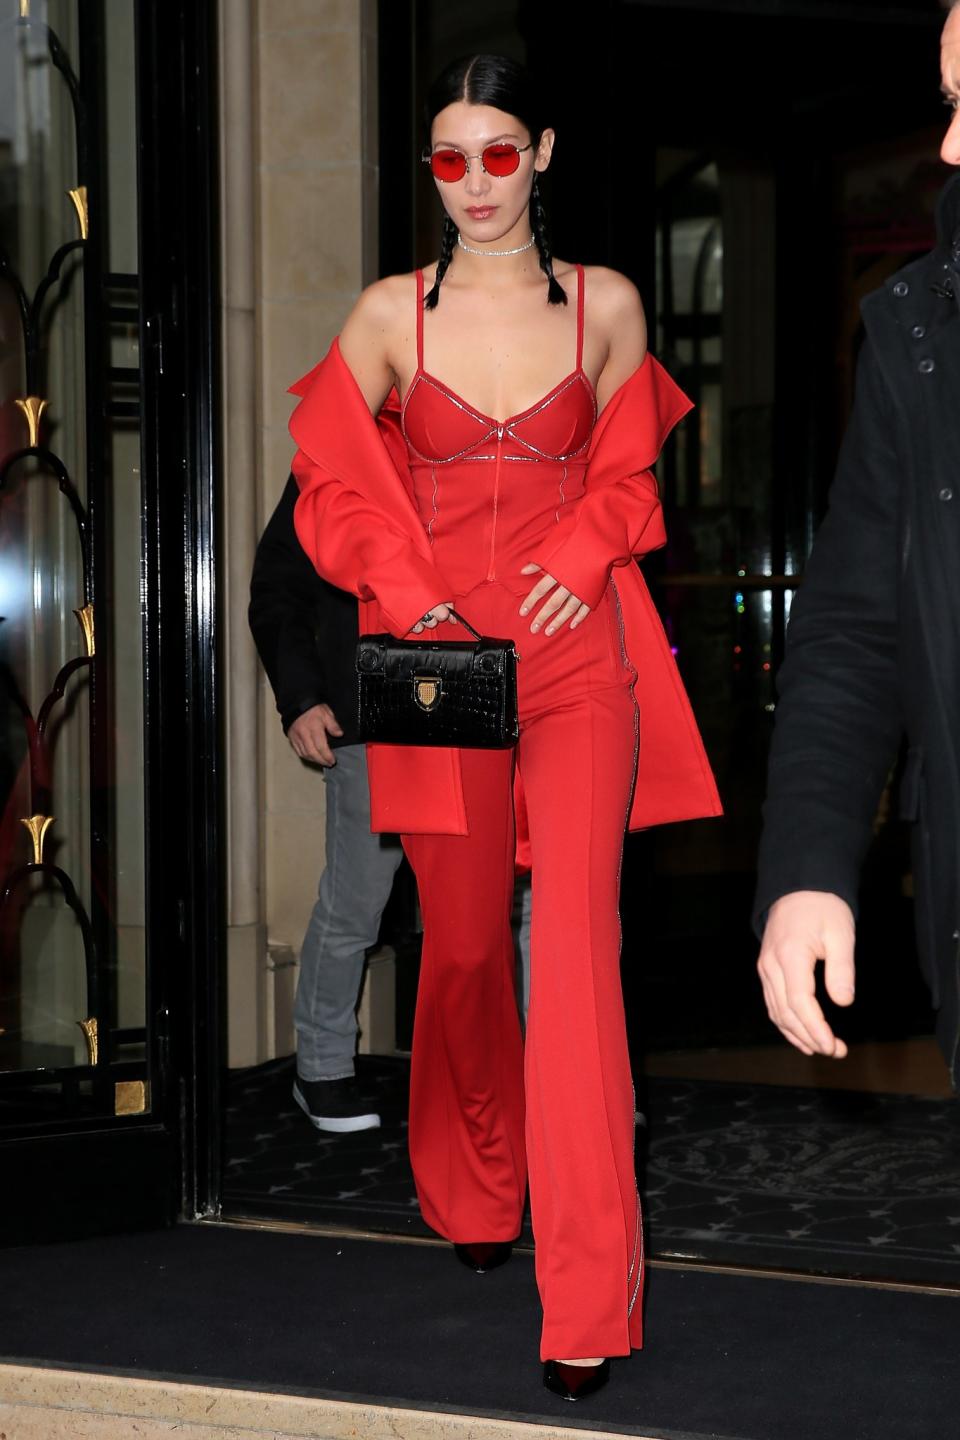 <p>Nothing screams “I just want to blend in” quite like a head-to-toe, bright red ensemble. Perhaps this is a new line of Hillary Clinton inspired power-suits that can be worn to the office and an all-night rave. Pass us a glow-stick, Bella! </p>